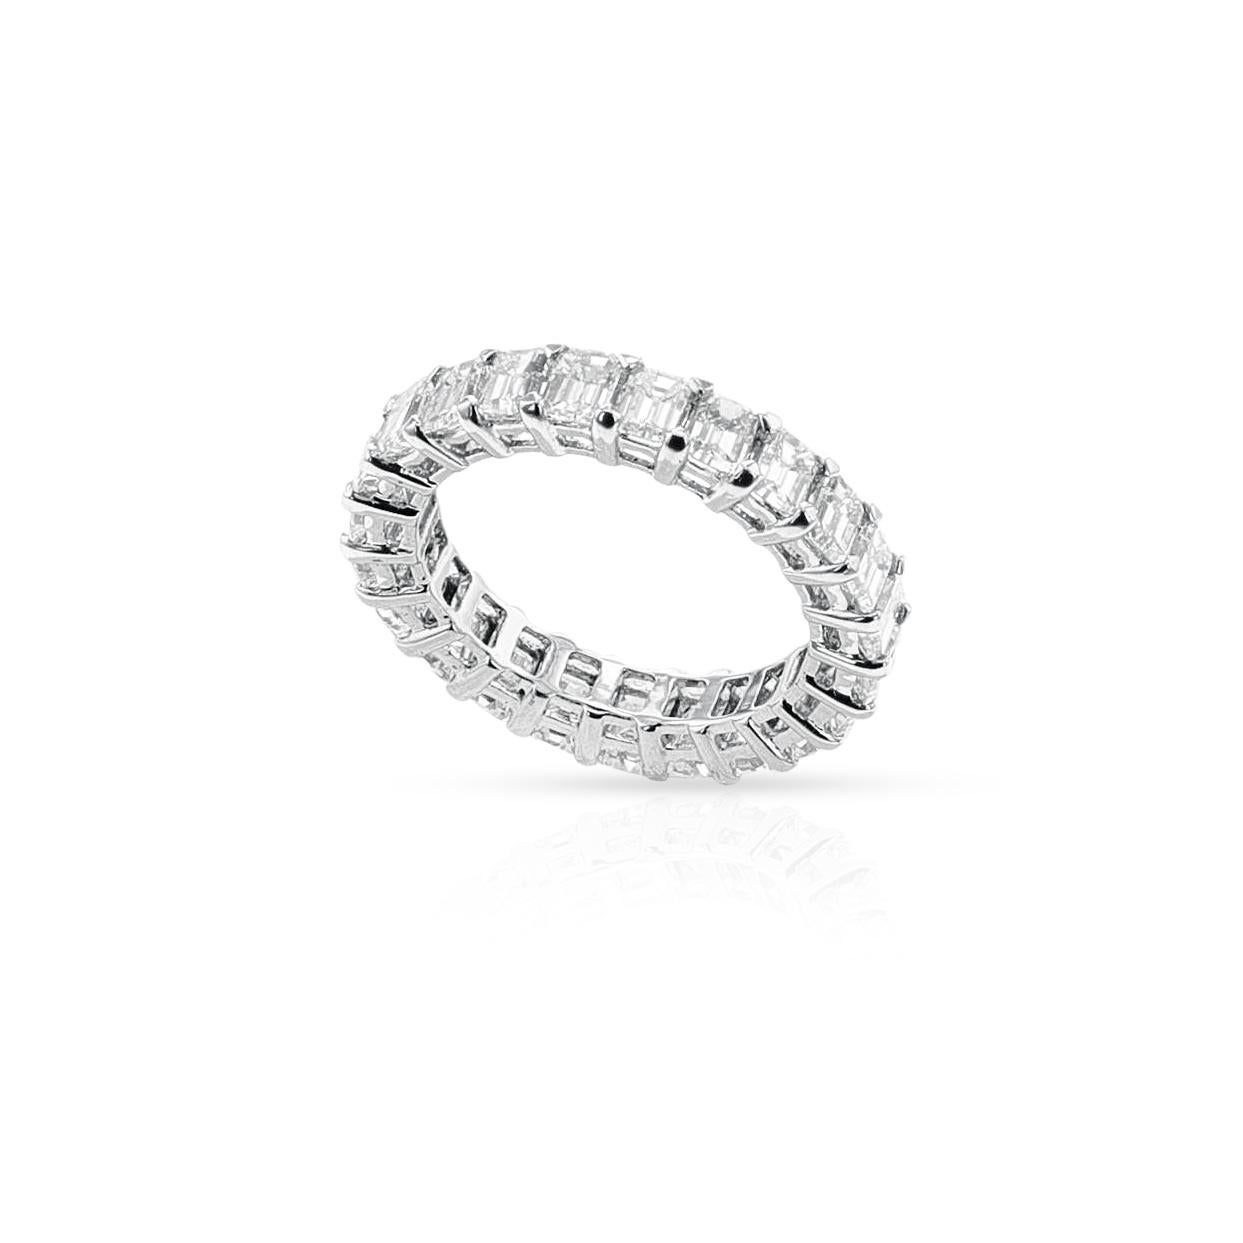 Emerald-Cut 4.61 ct. Diamond Eternity Band, 18k White Gold  For Sale 1